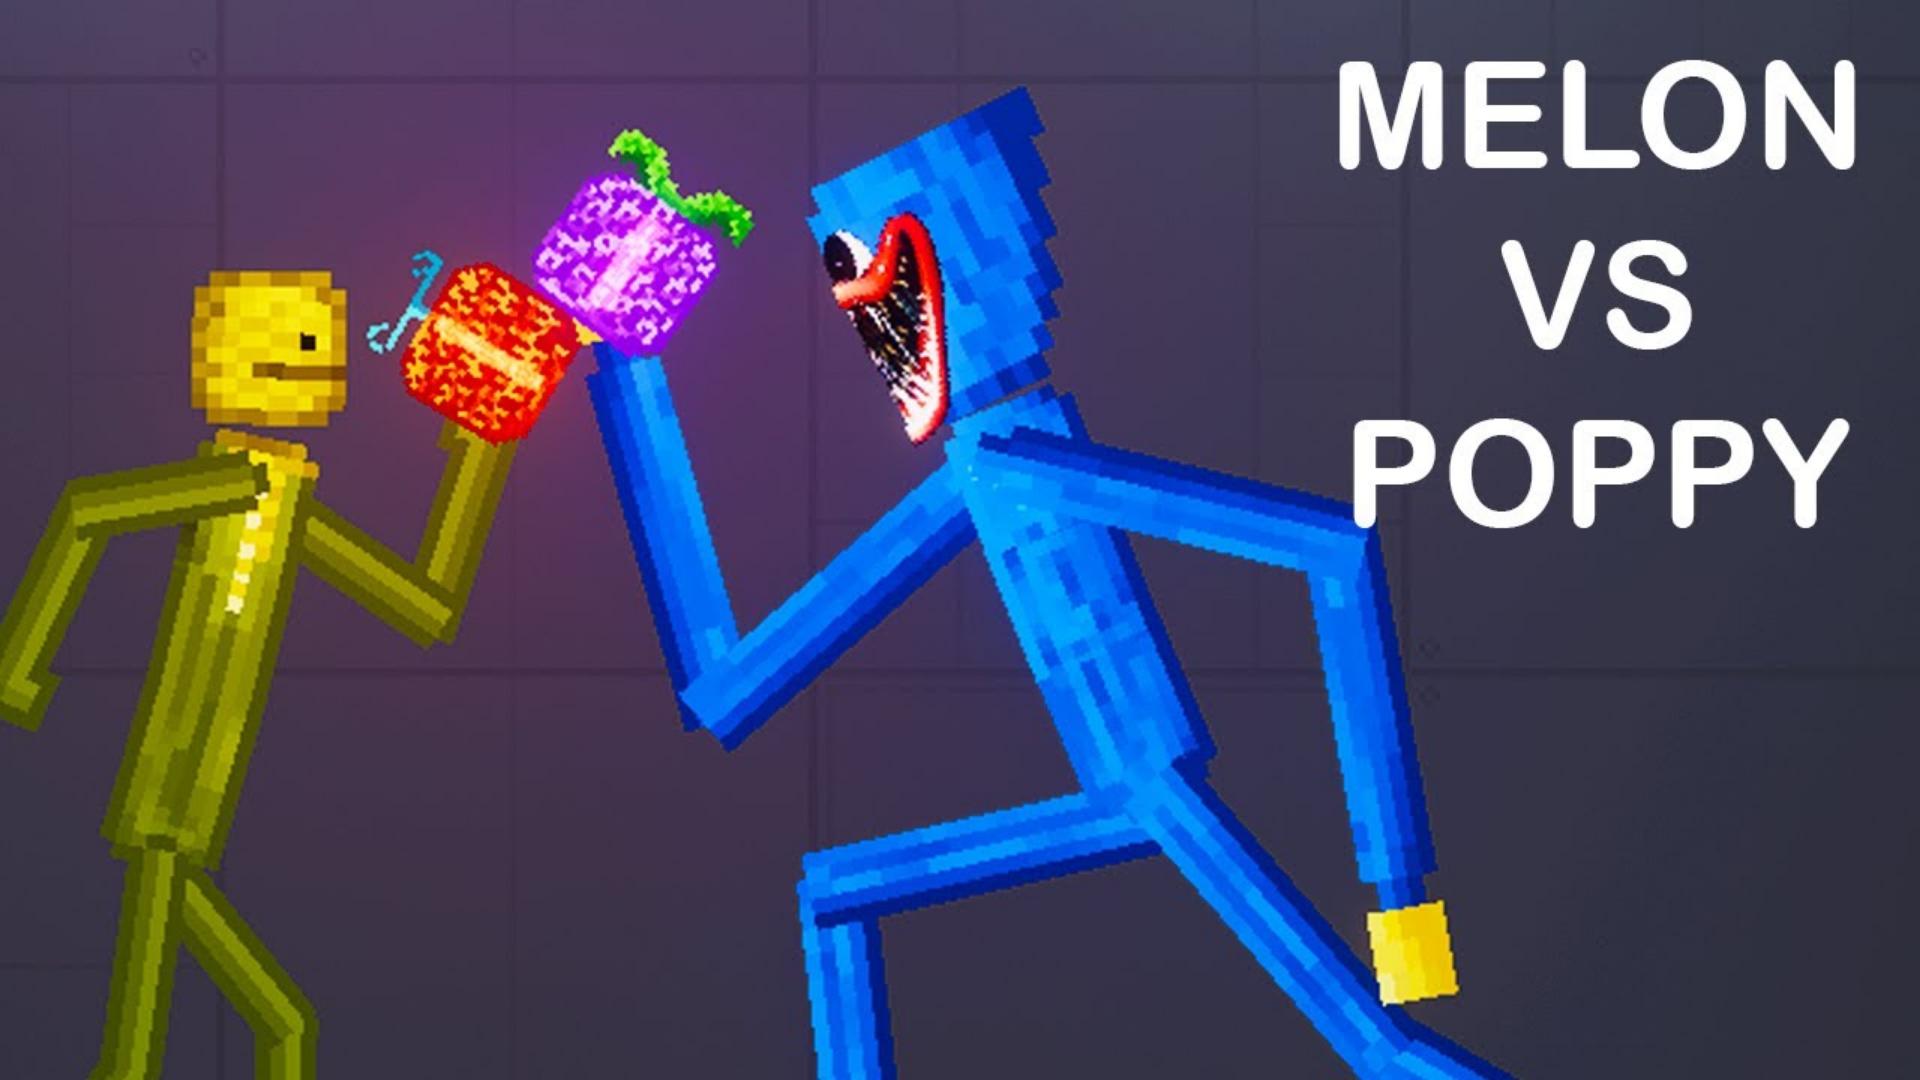 Boxy Boo Mods Melon Playground APK for Android Download